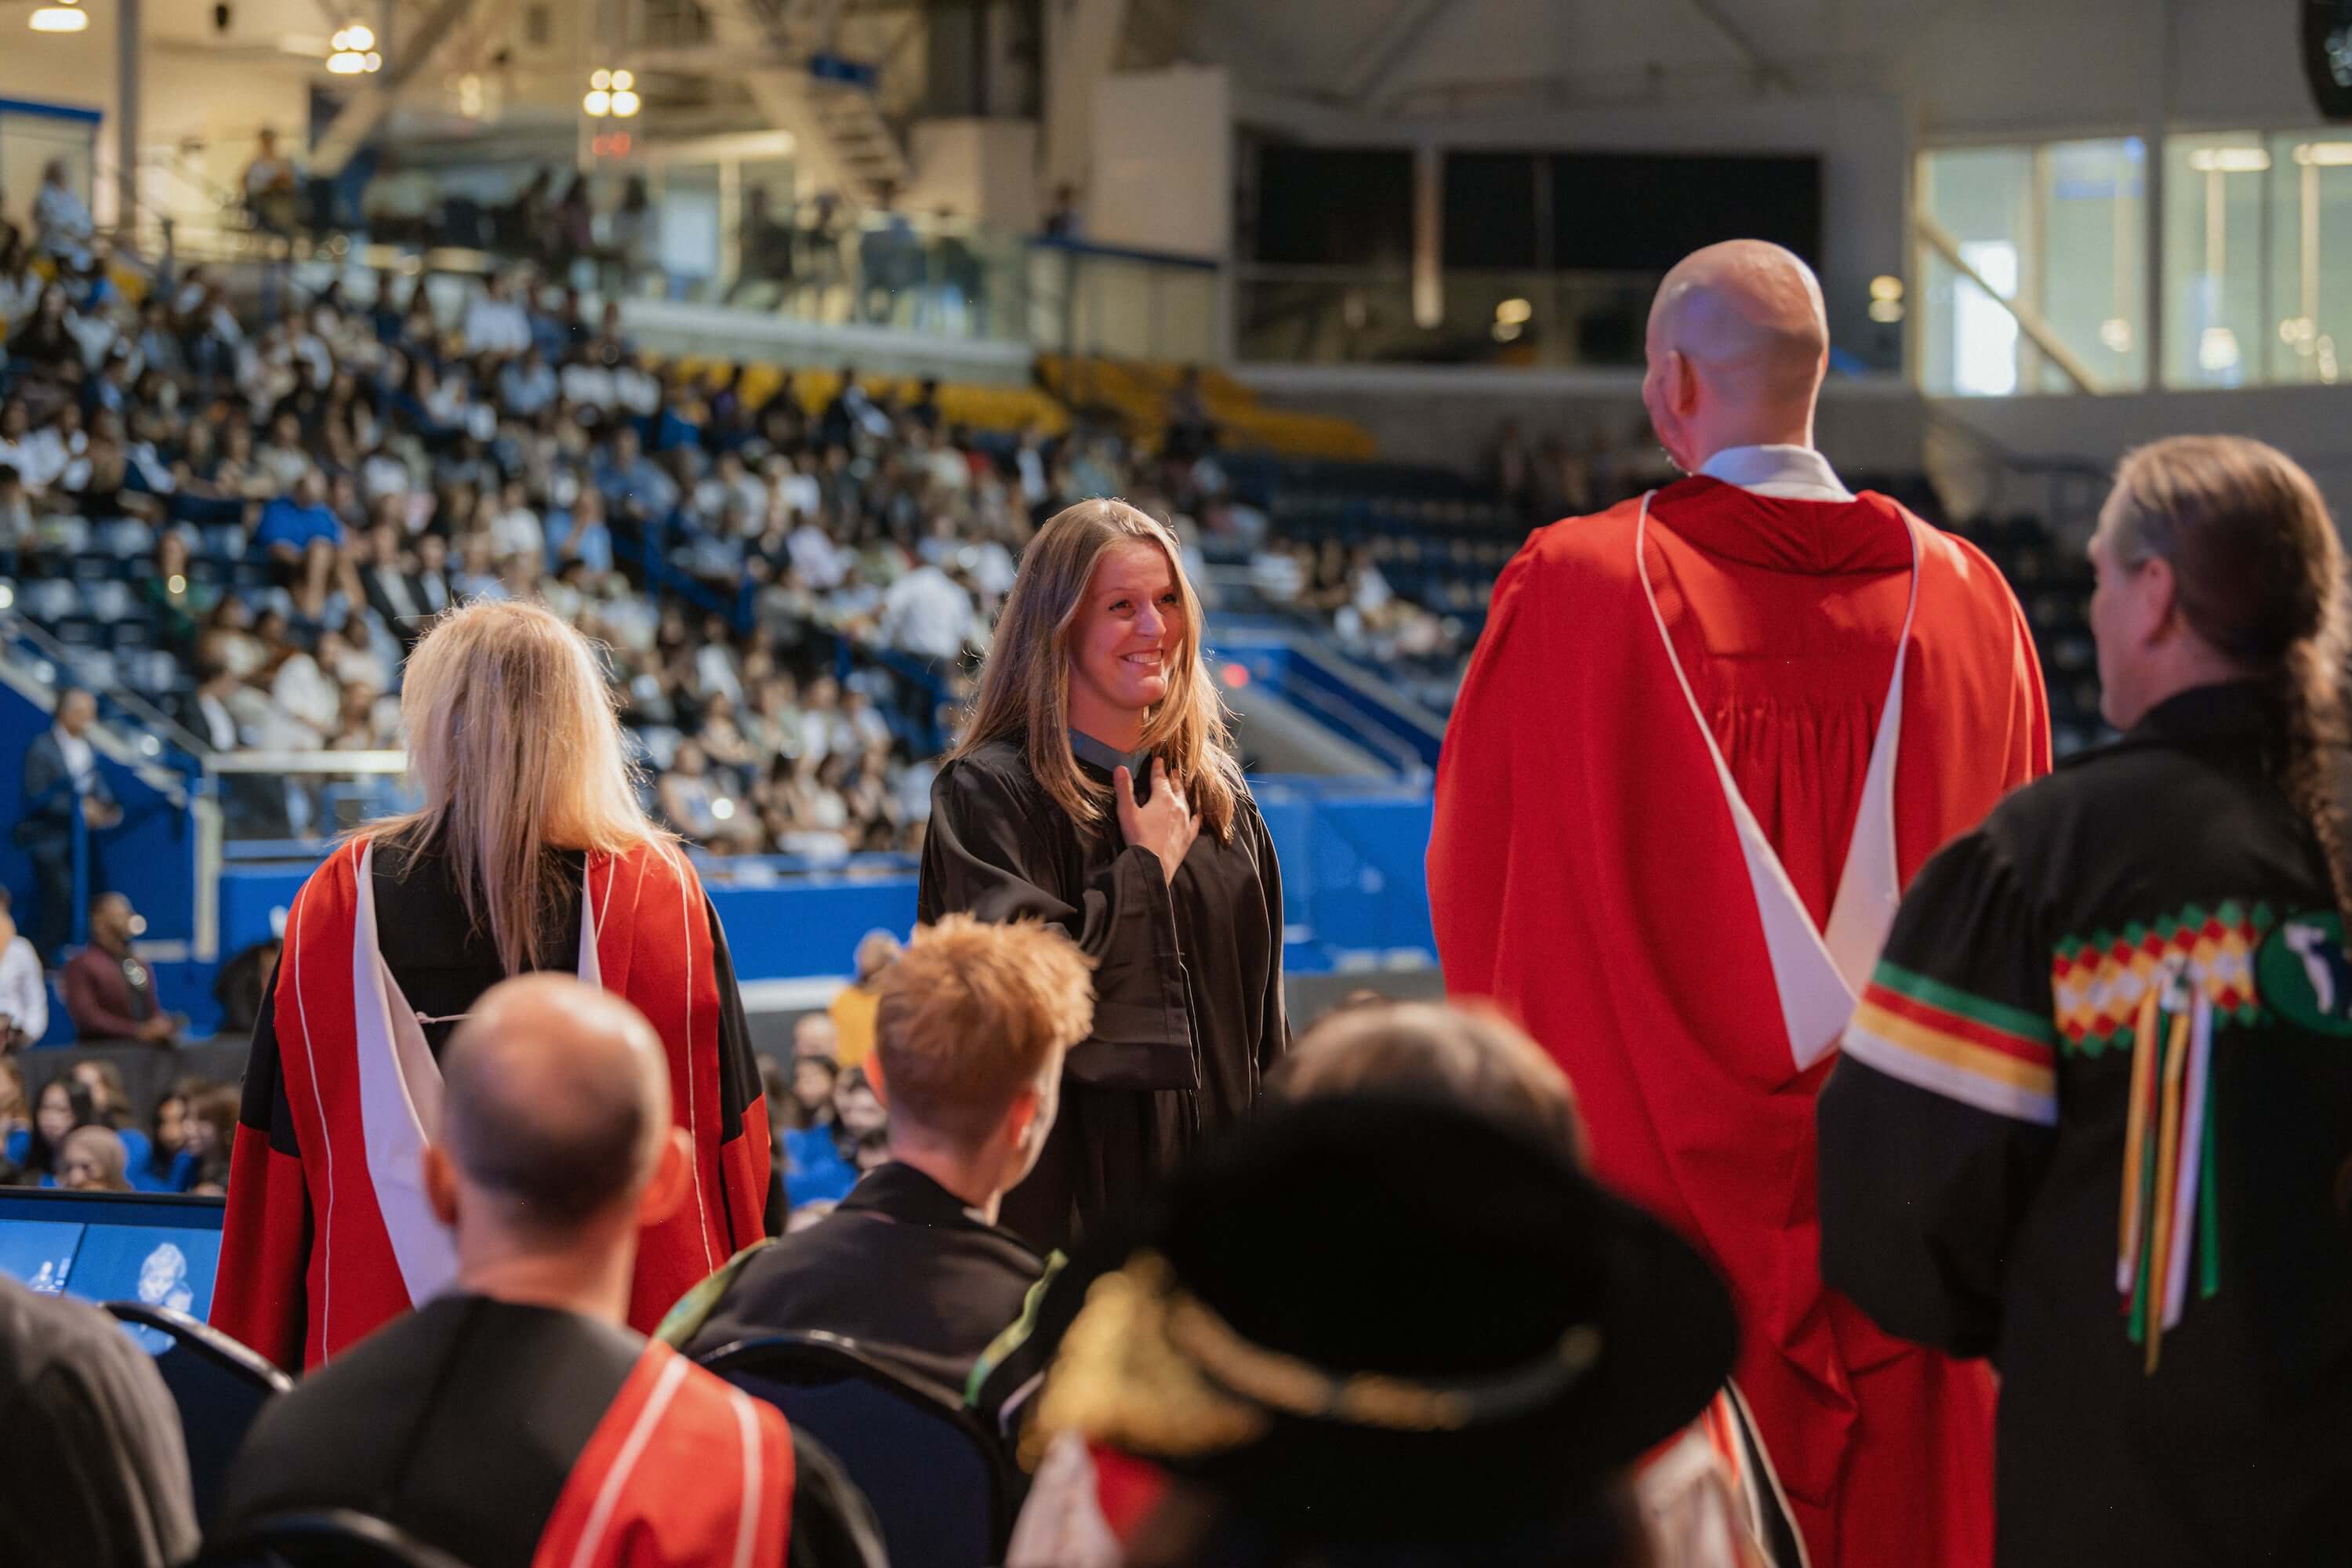 A woman with her hand on her heart walking across the stage at Convocation.